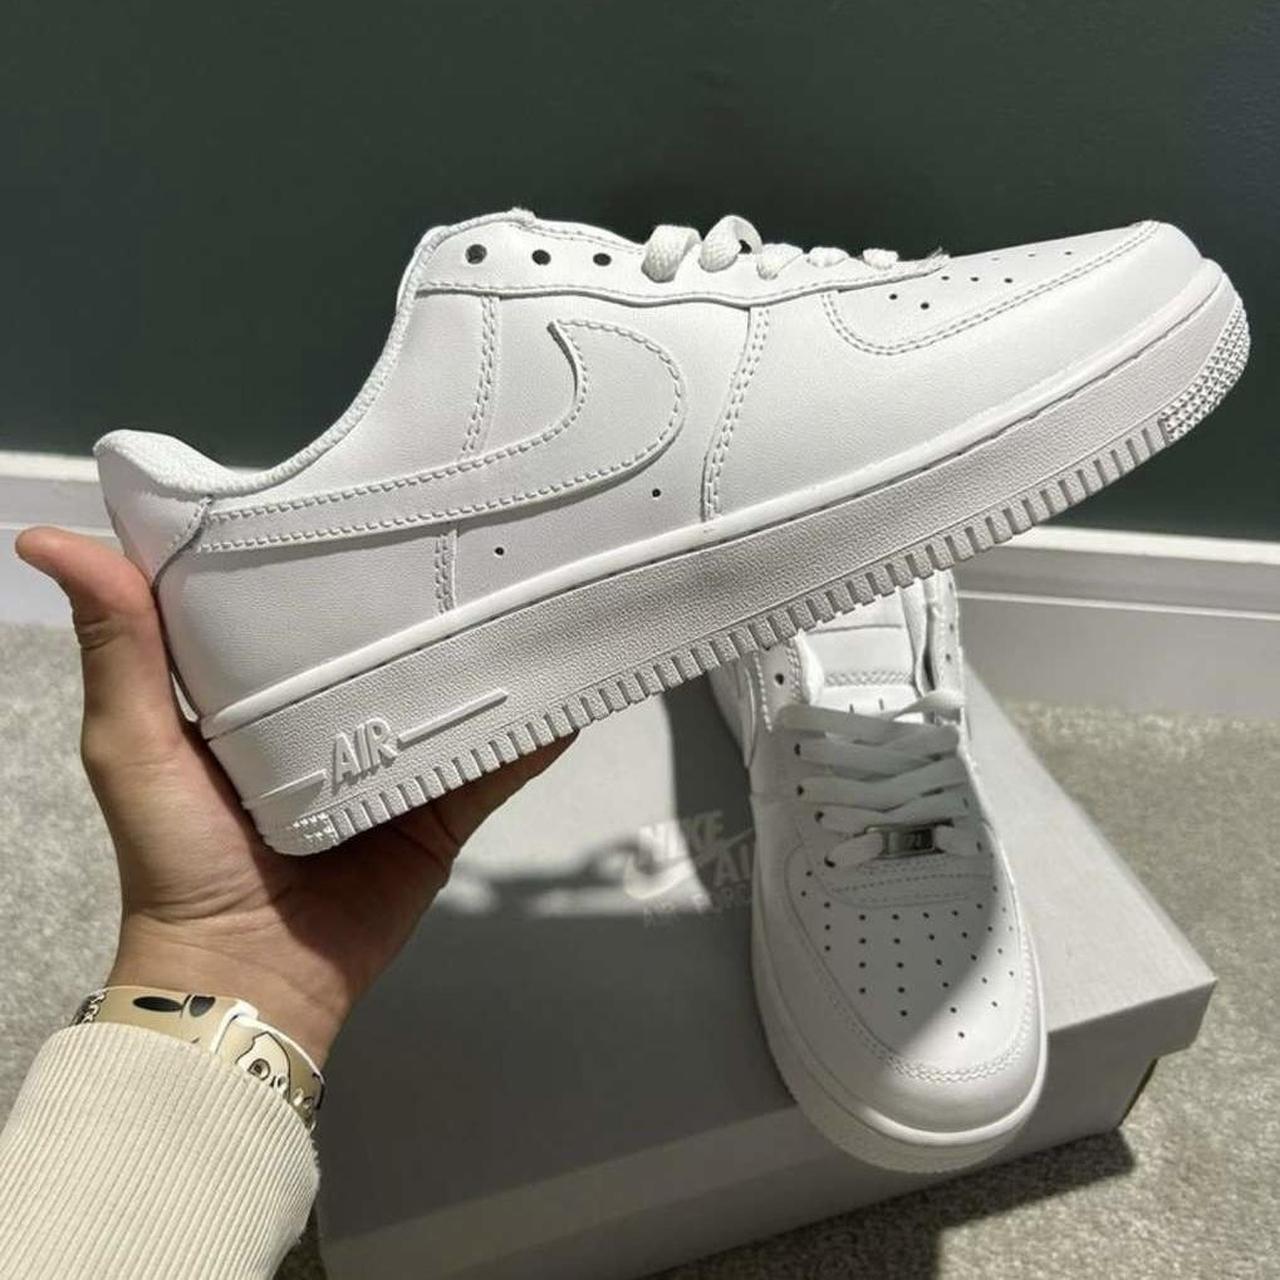 Nike airforce 1 In most adult sizes - Depop